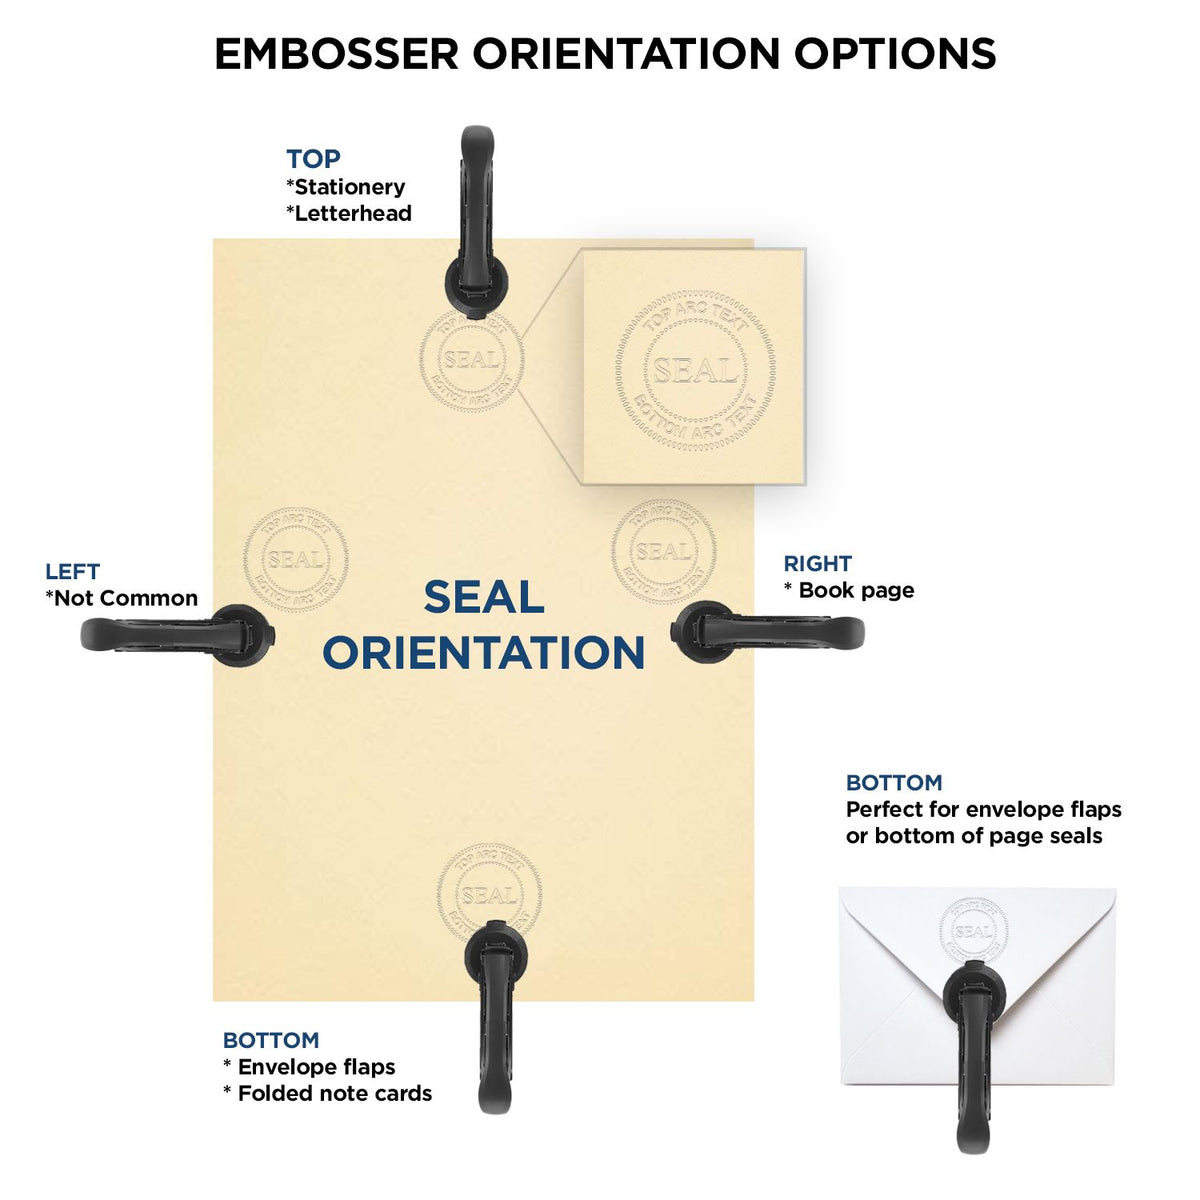 An infographic for the Long Reach Florida PE Seal showing embosser orientation, this is showing examples of a top, bottom, right and left insert.